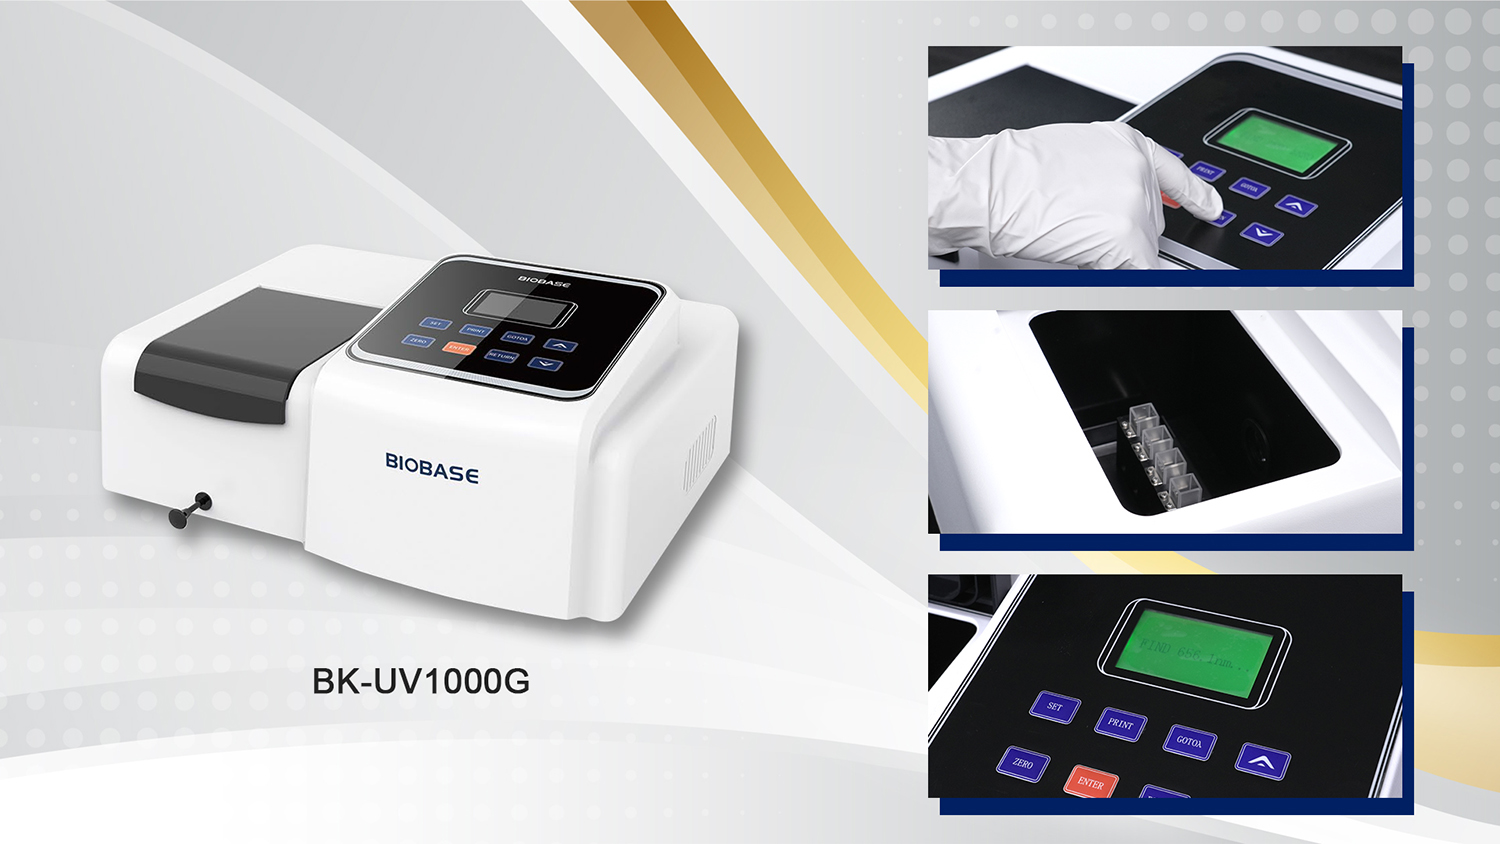 How much do you know about laboratory spectrophotometers?